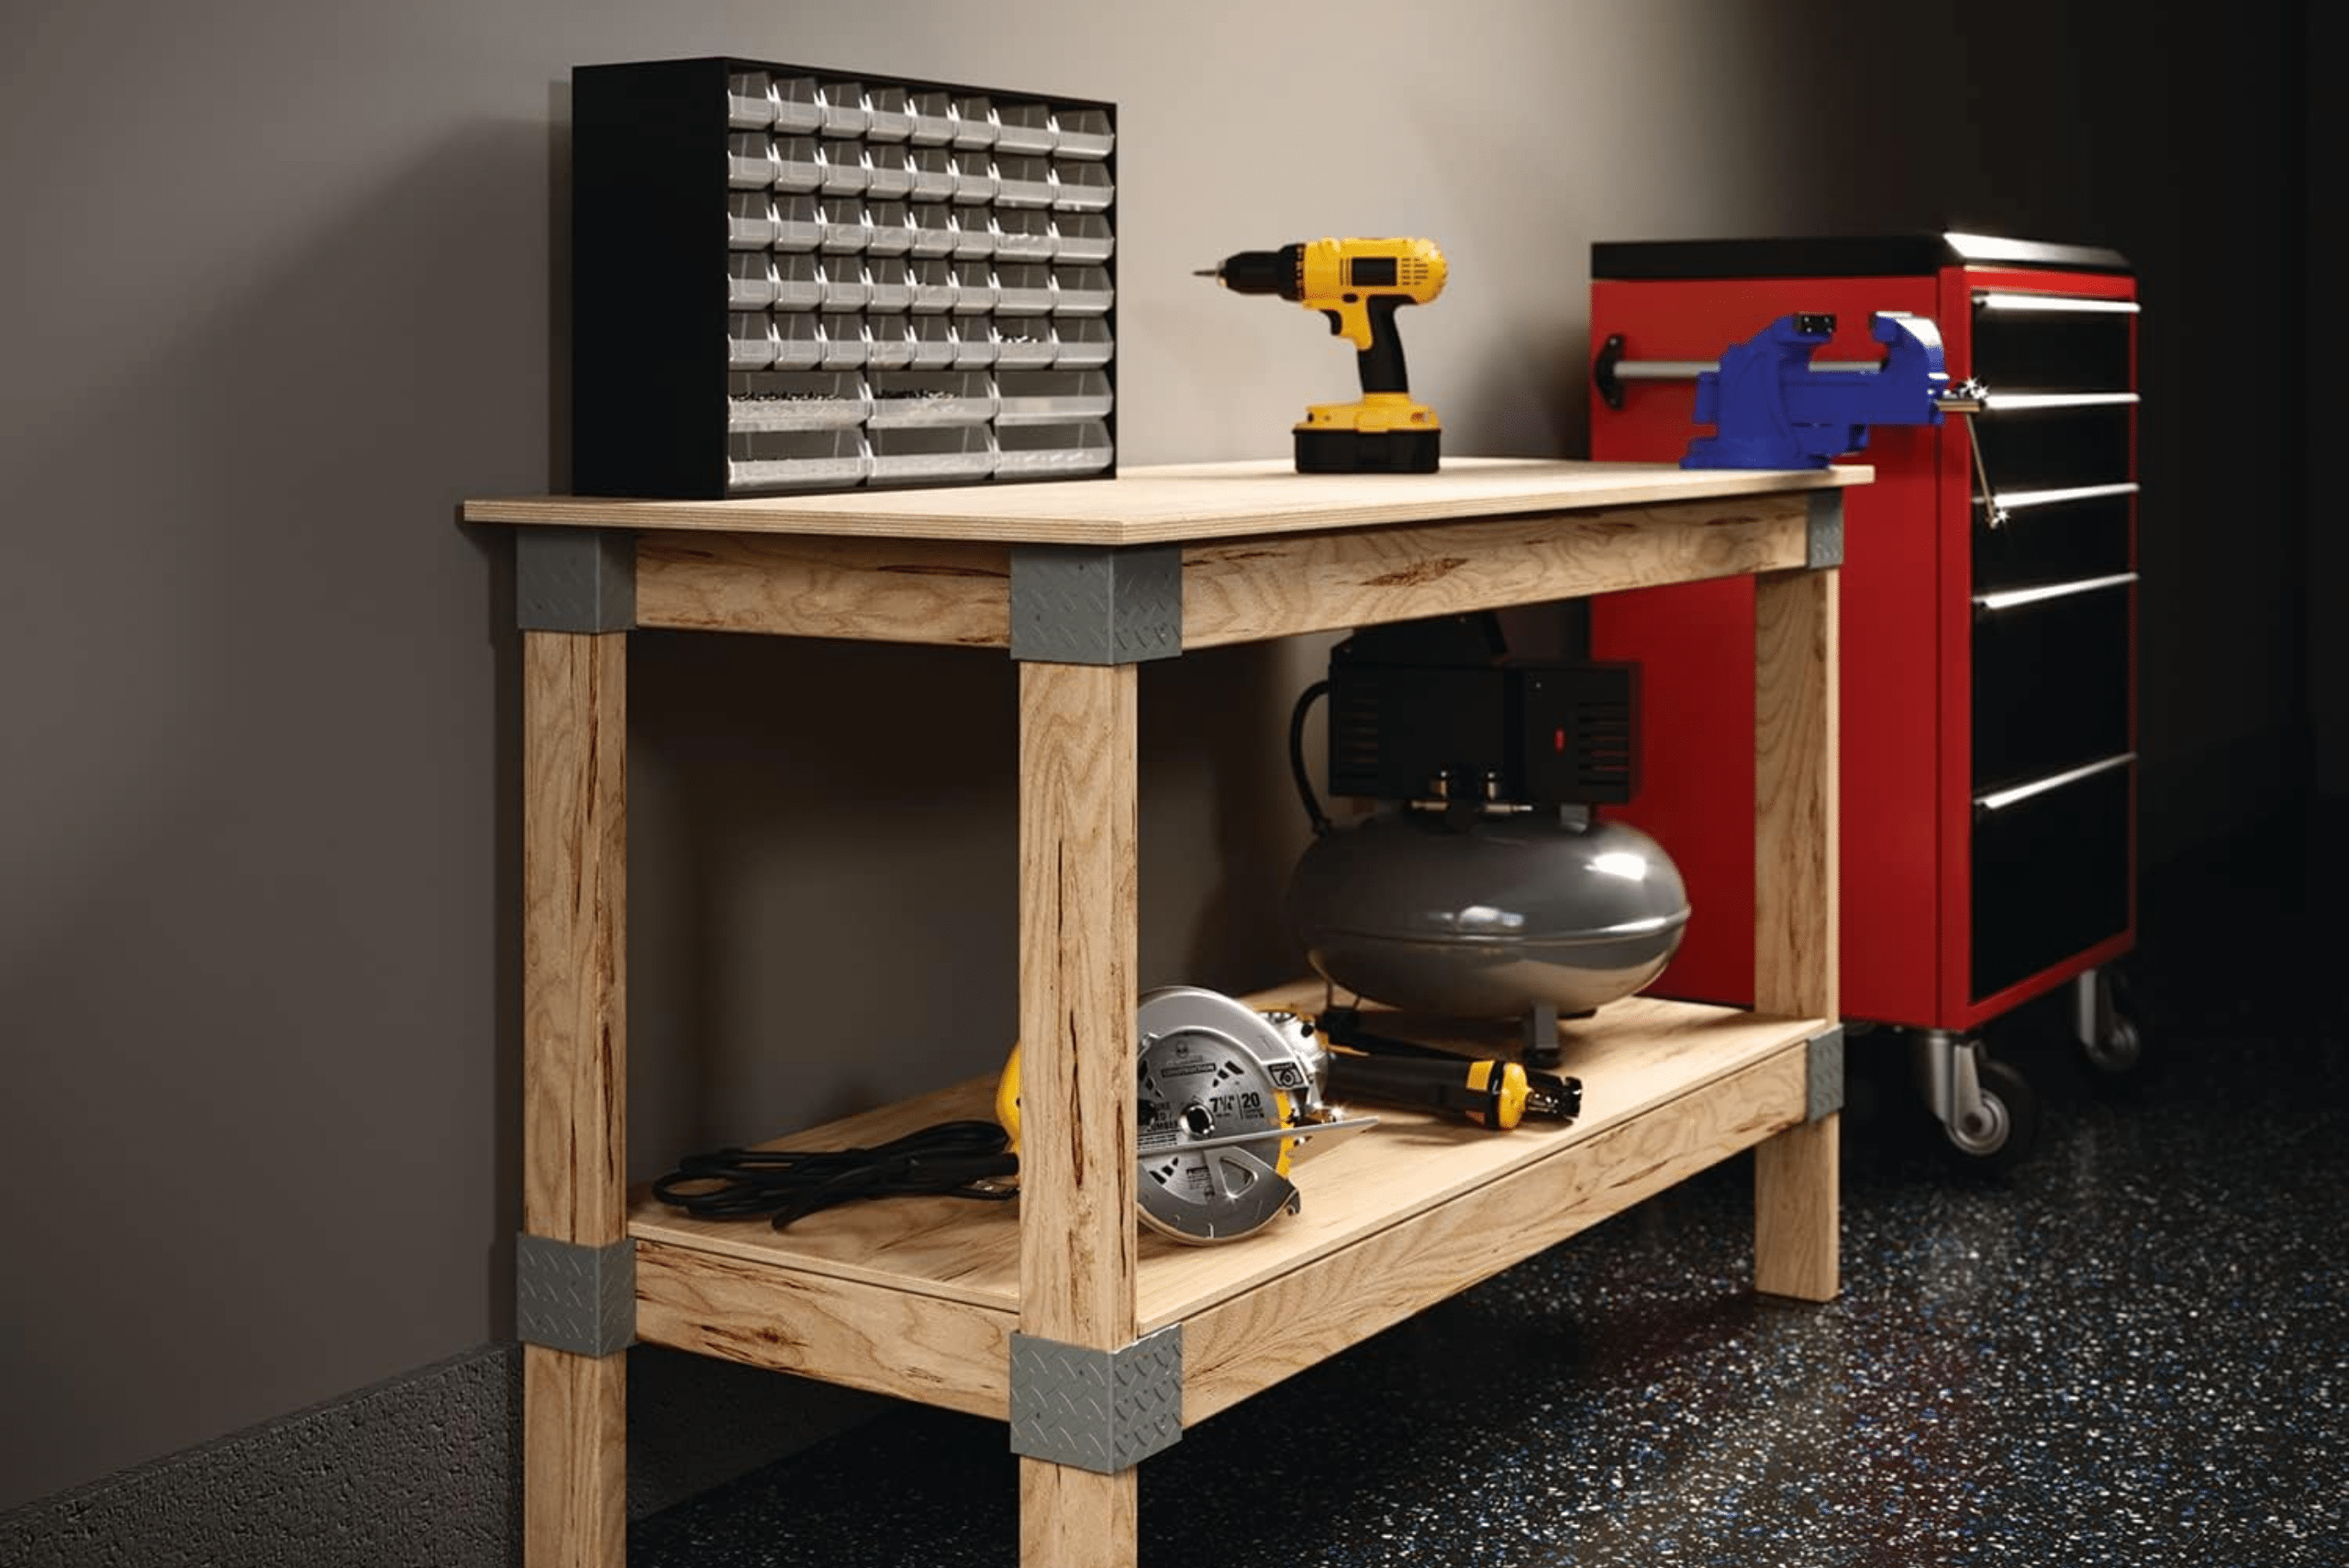 A workbench with a yellow drill and a bolt and nut organizer.